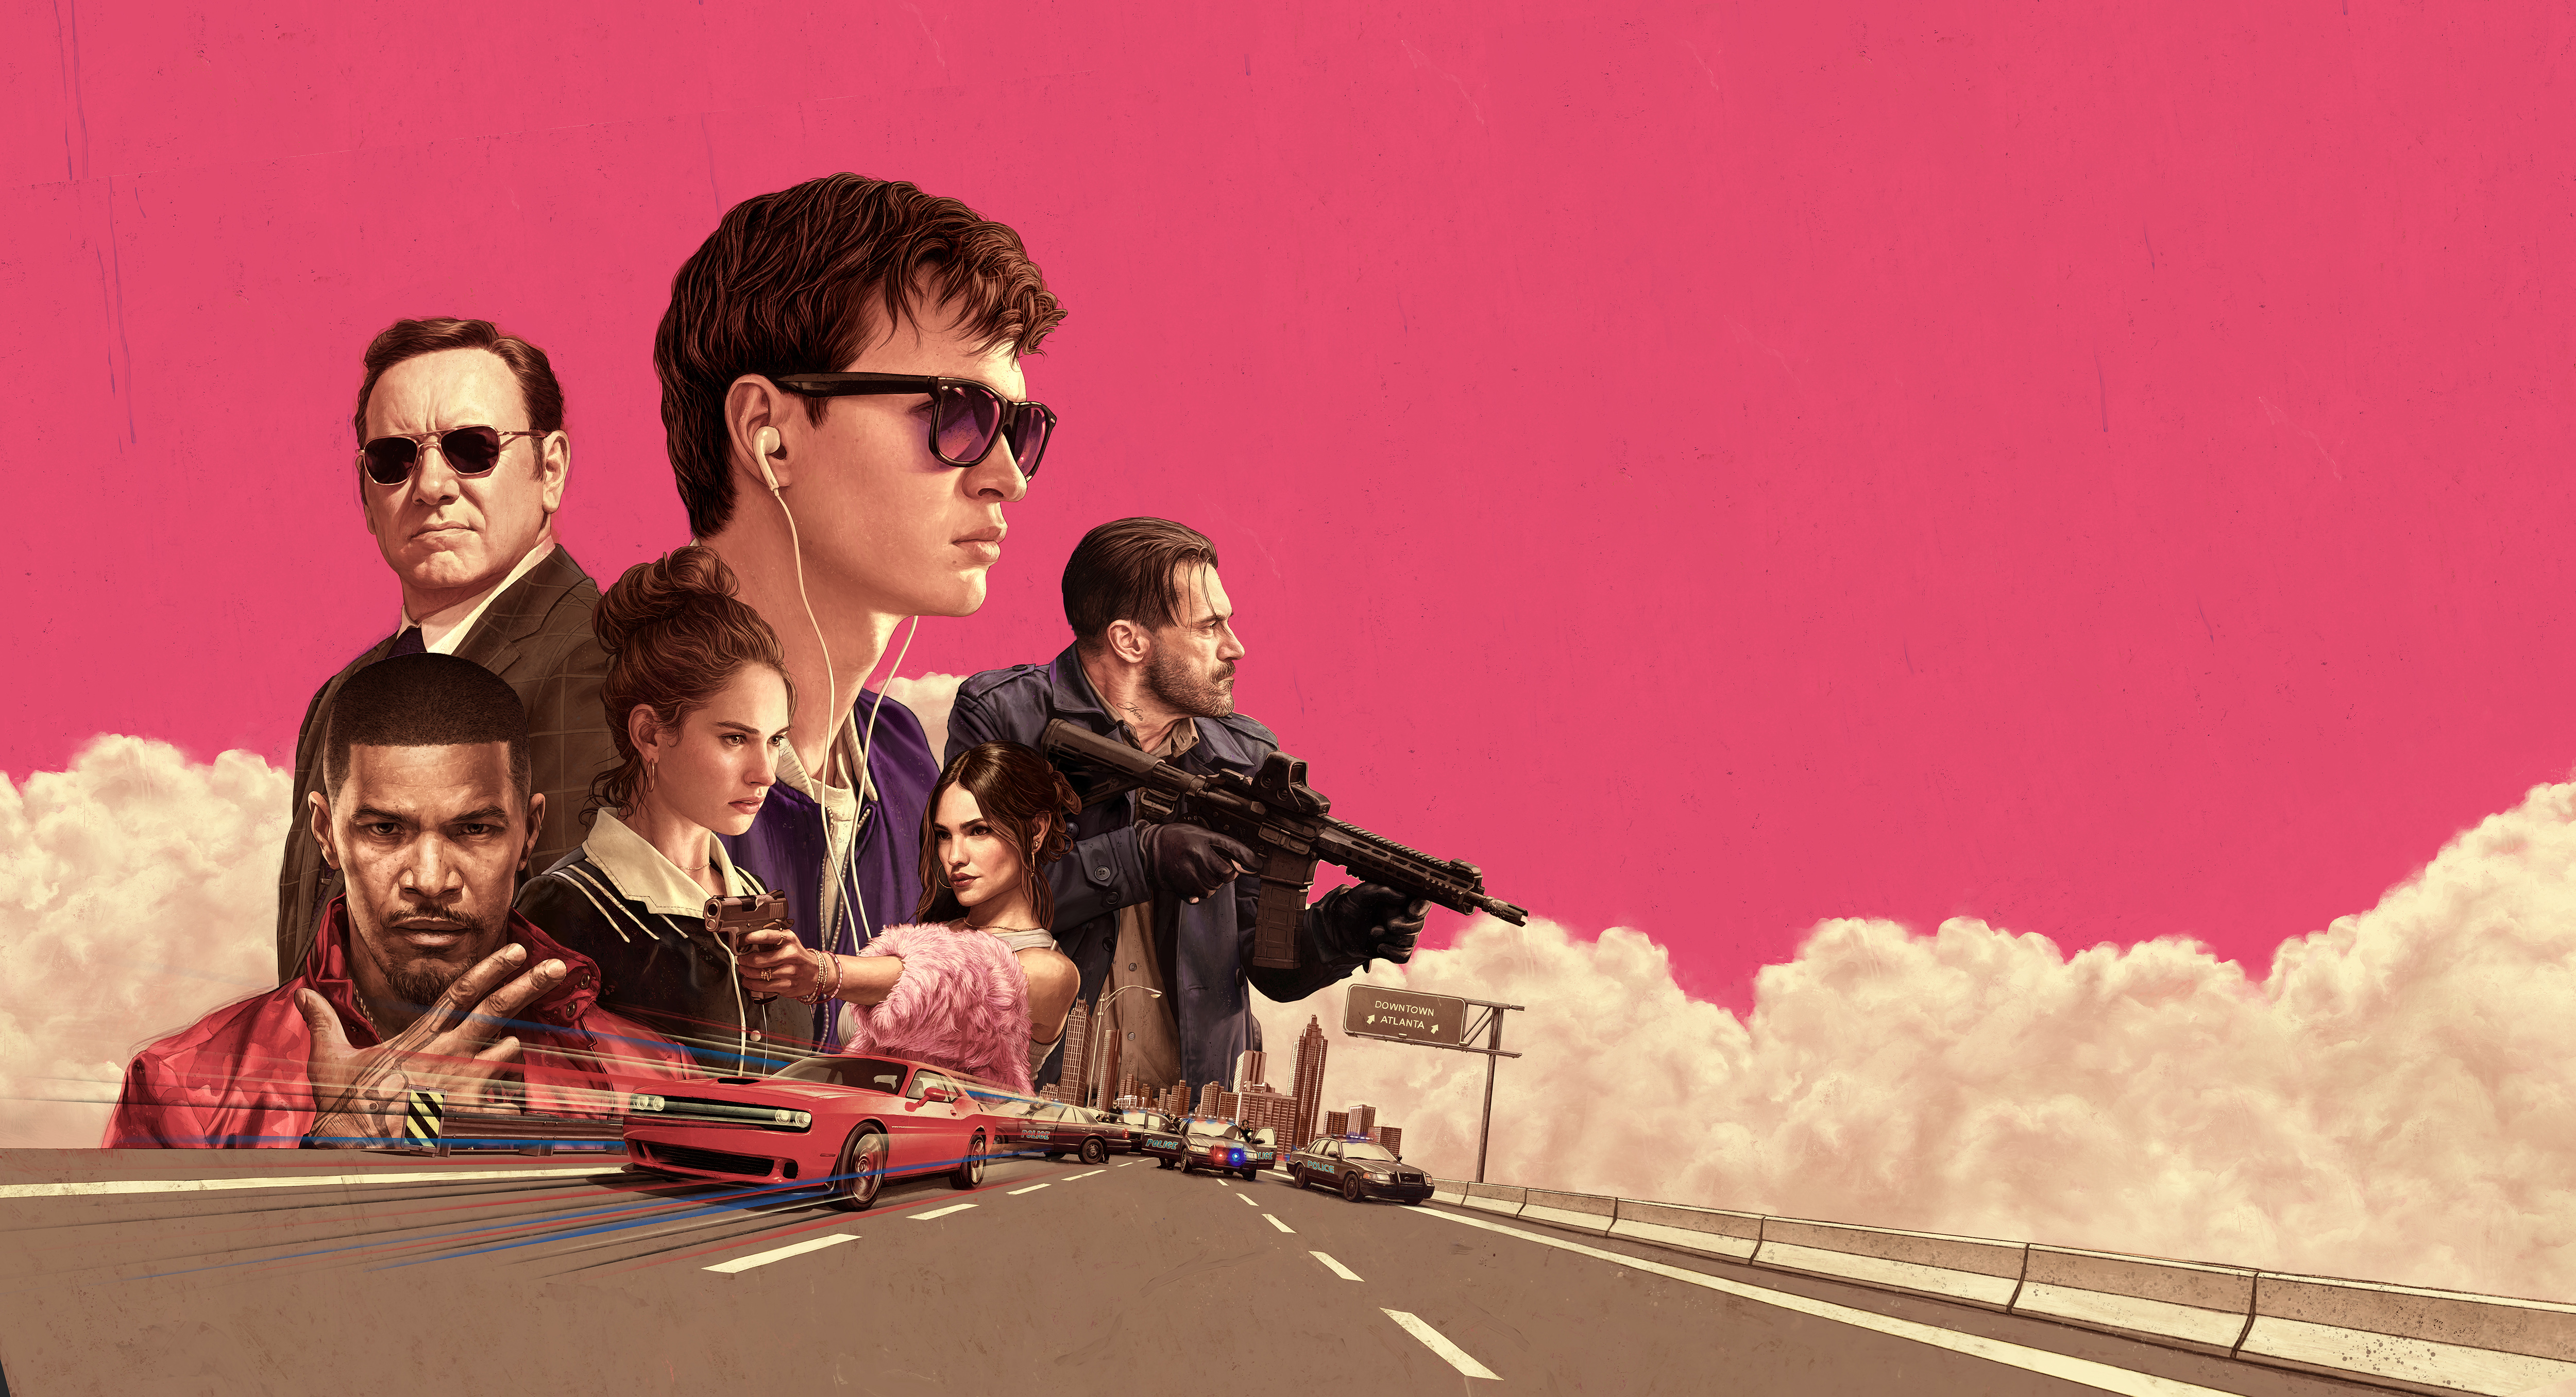 General 5000x2711 Baby Driver movies Kevin Spacey Jamie Foxx car road assault rifle weapon Jon Hamm Eiza Gonzalez Lily James Ansel Elgort poster